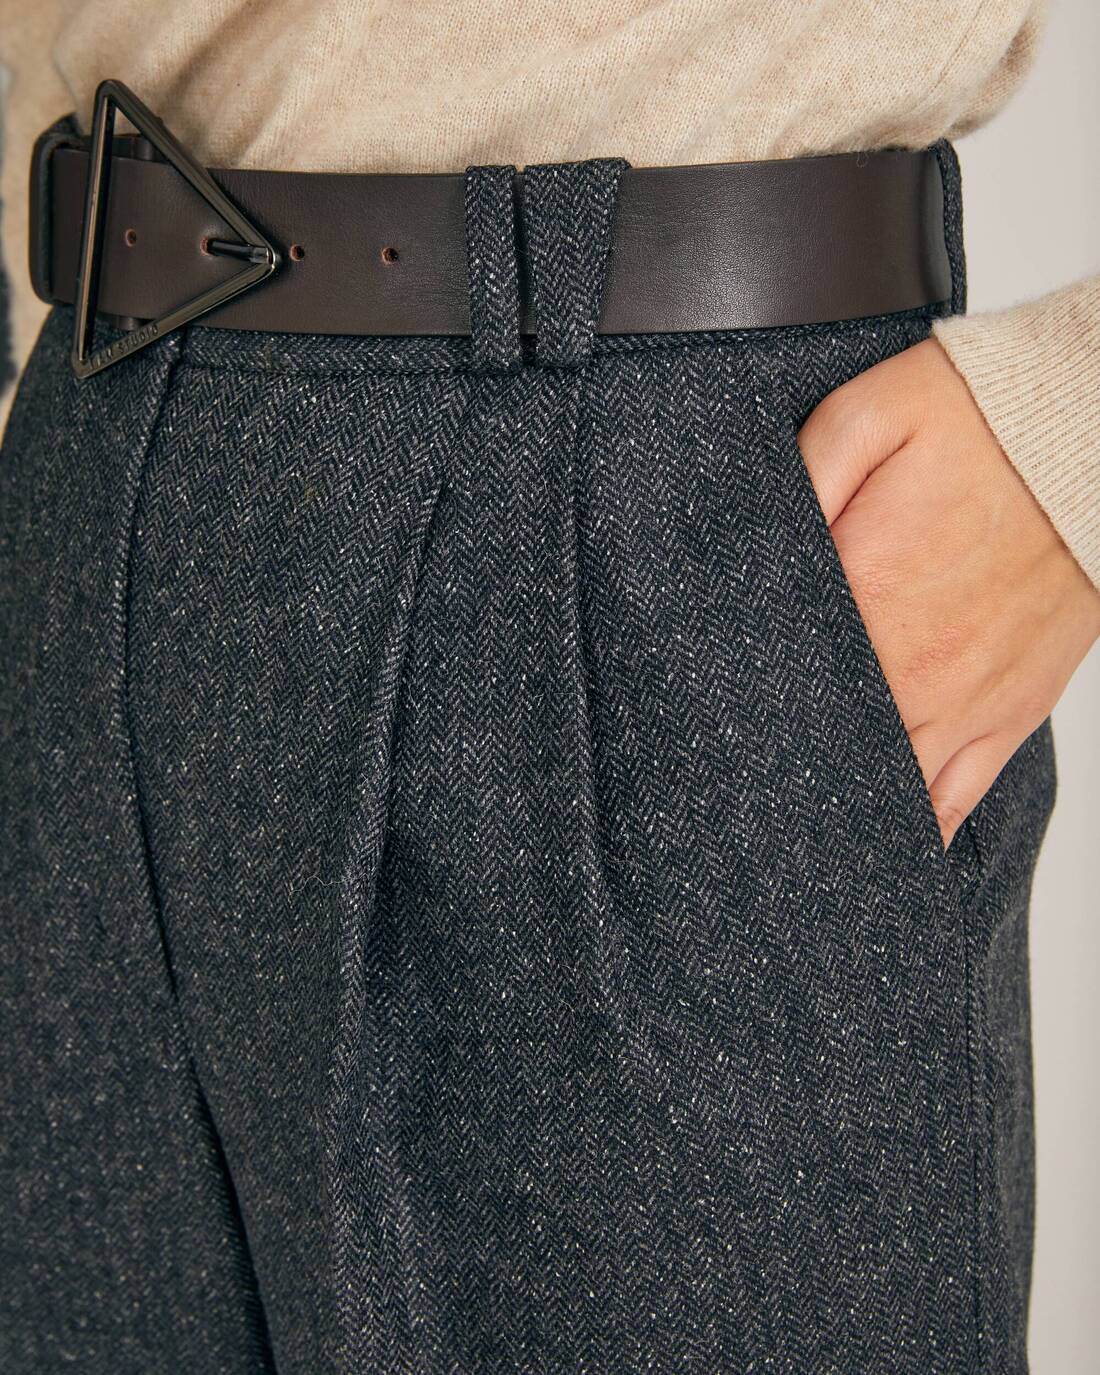 Tweed palazzo trousers with contrast stitching